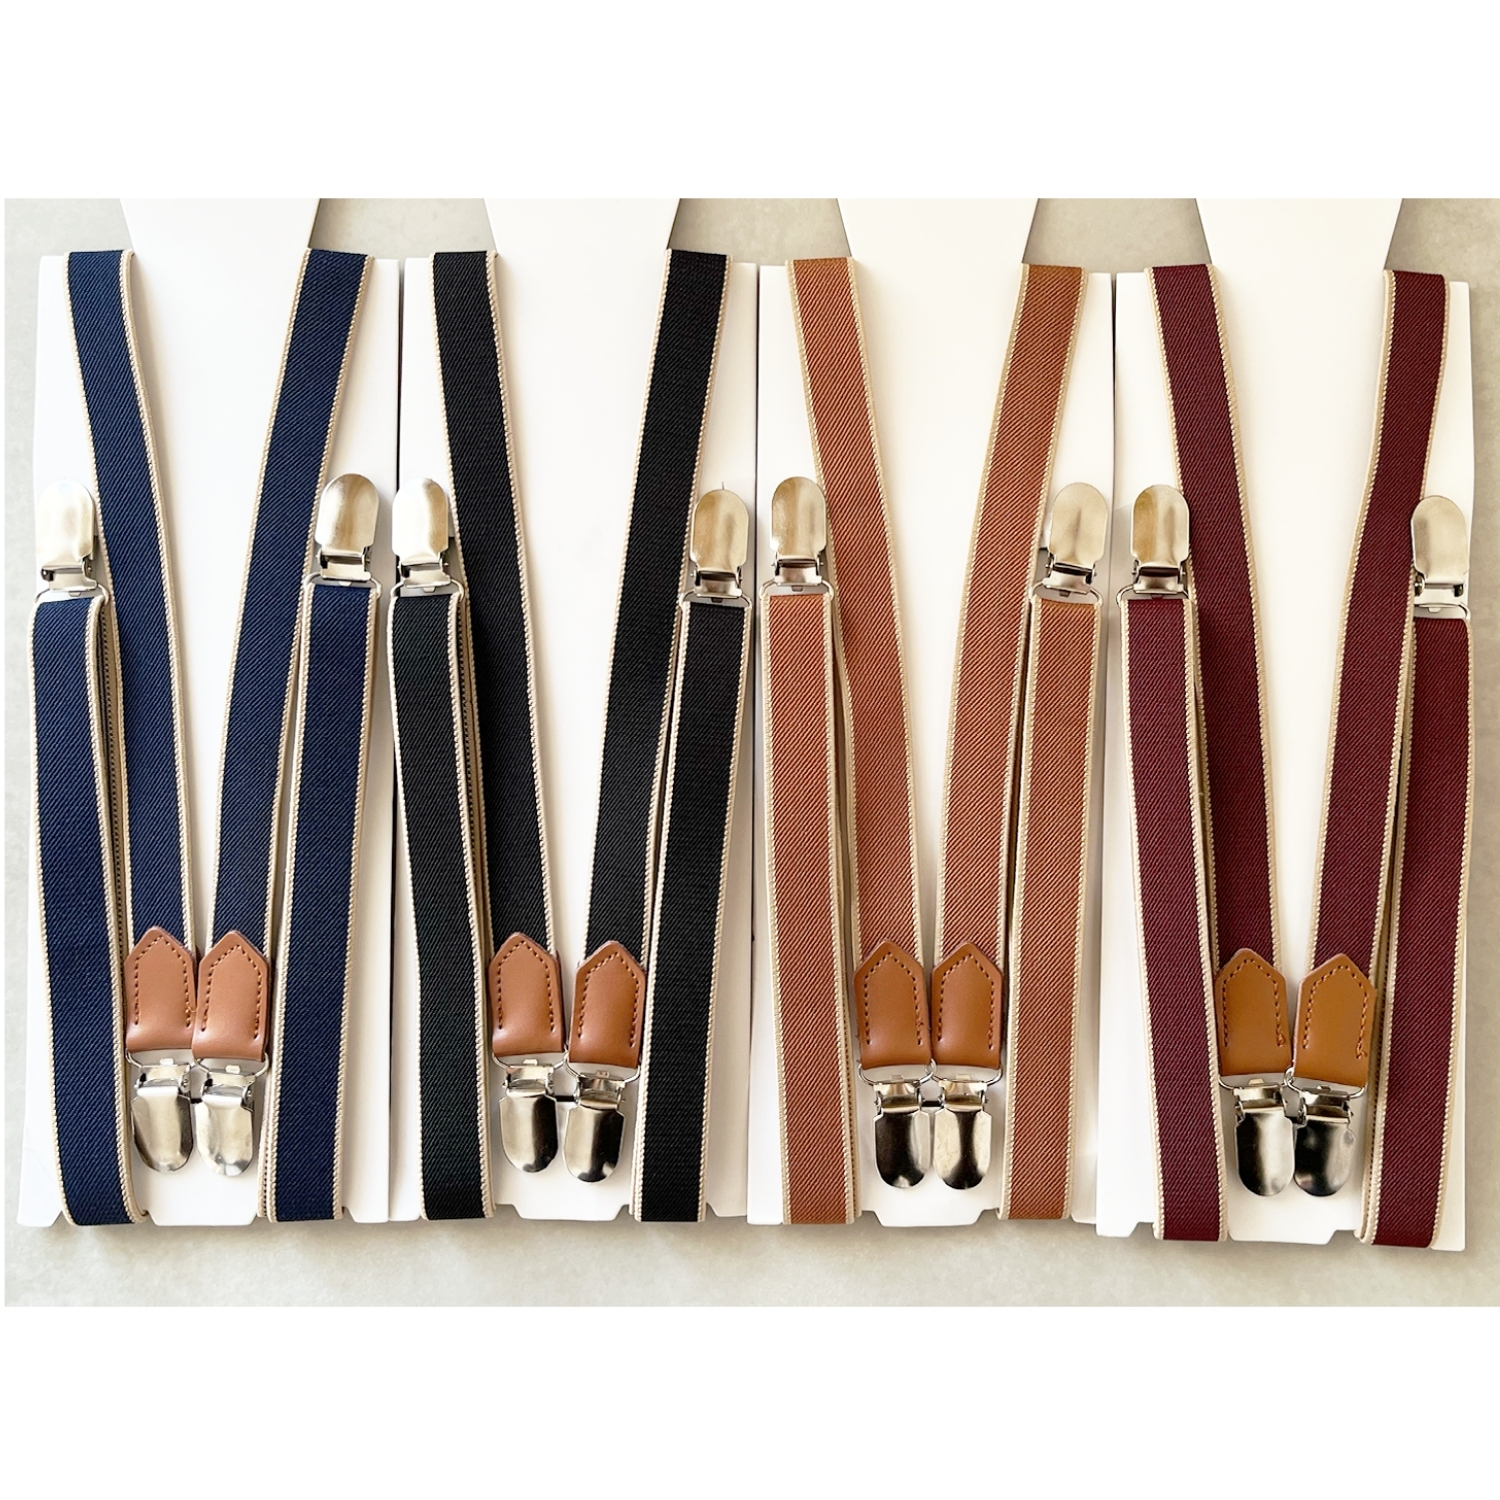  suspenders 20mm width I type independent type rose 2 ps type rom and rear (before and after) 2way men's lady's clip leather suspenders hanging band length adjustment possibility man woman small .haoa